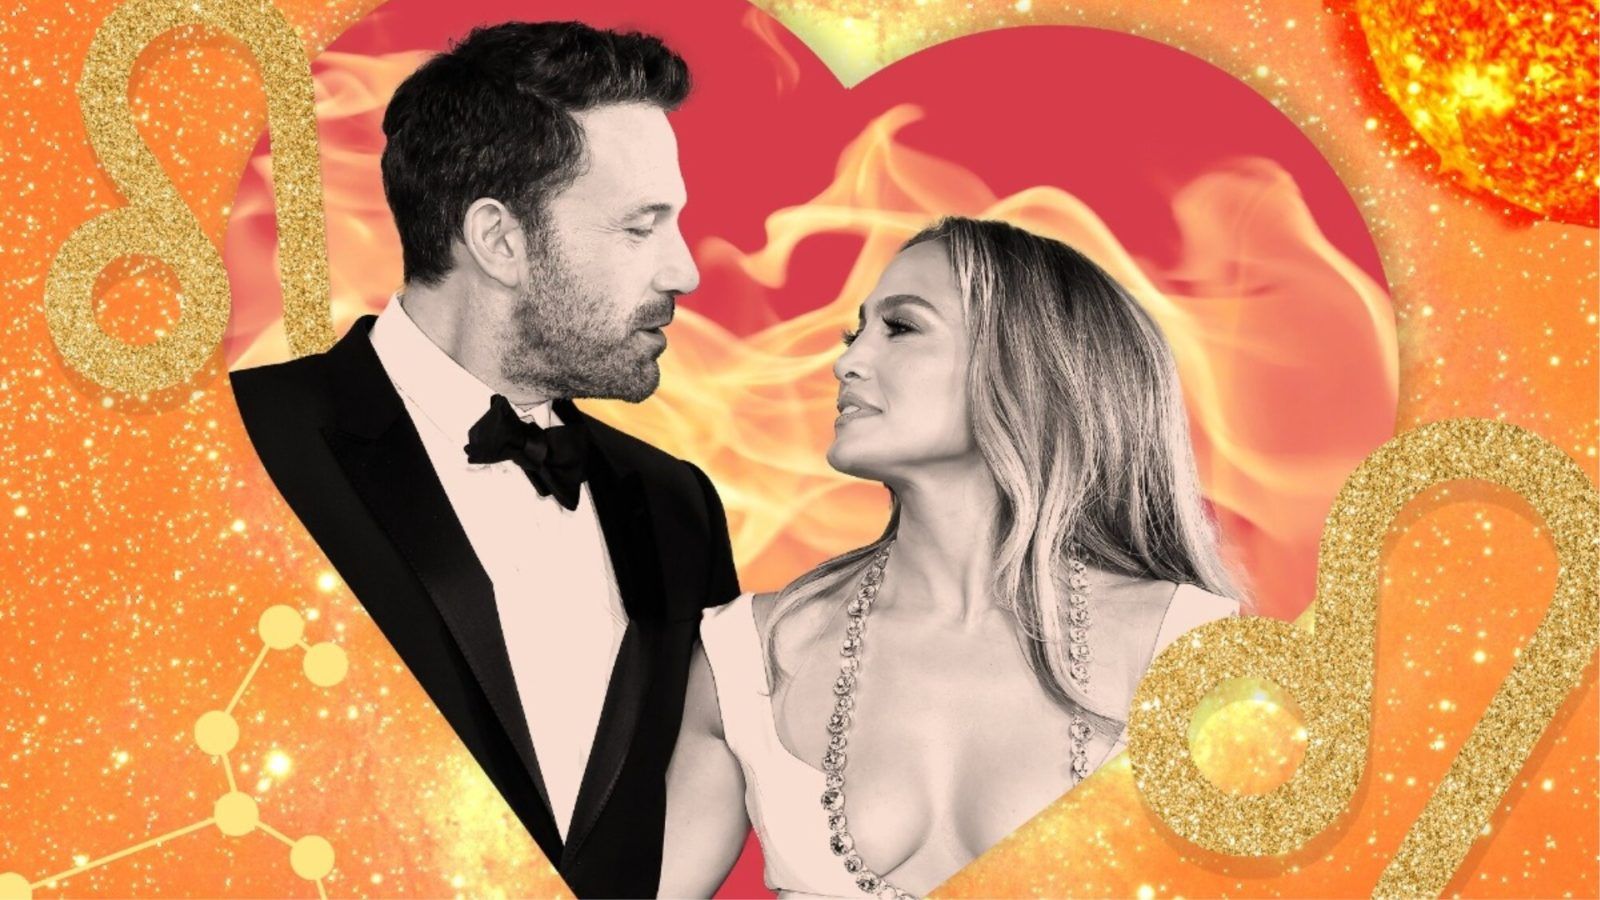 As astrological look at whether Jennifer Lopez and Ben Affleck are truly meant to be